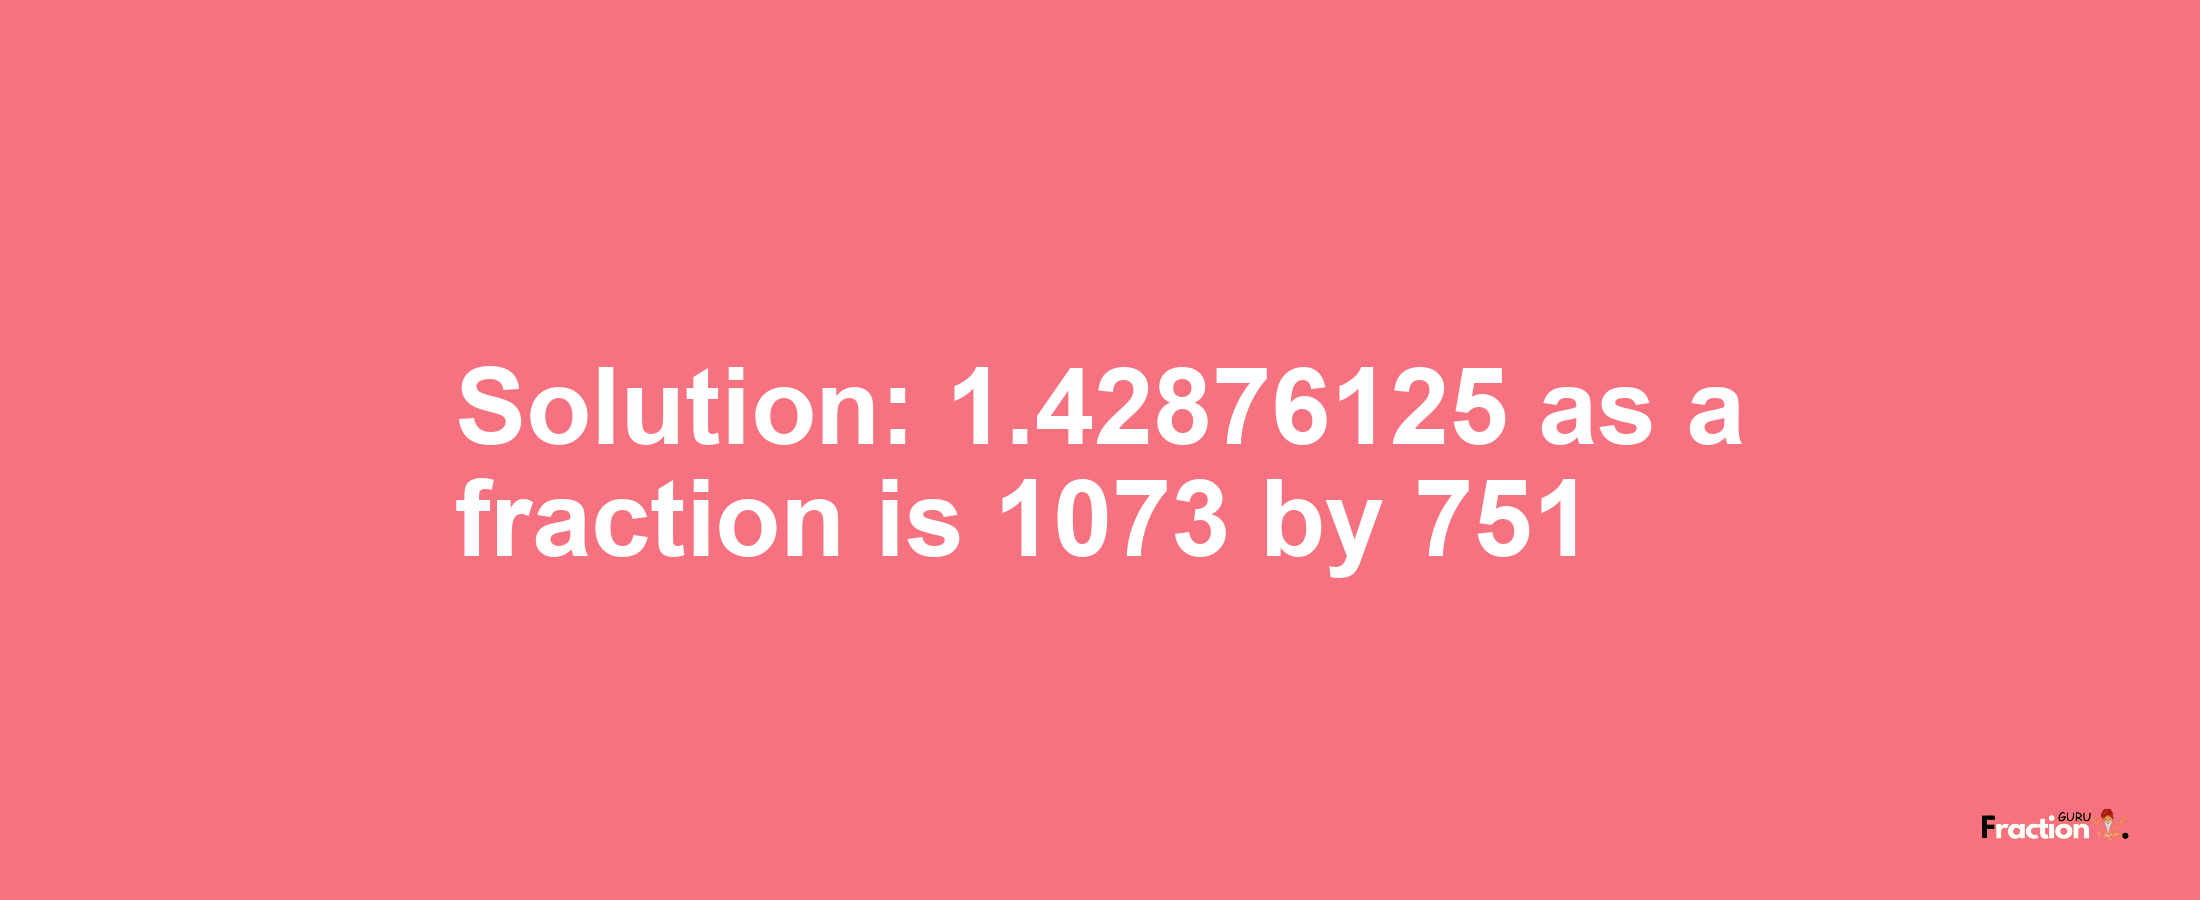 Solution:1.42876125 as a fraction is 1073/751